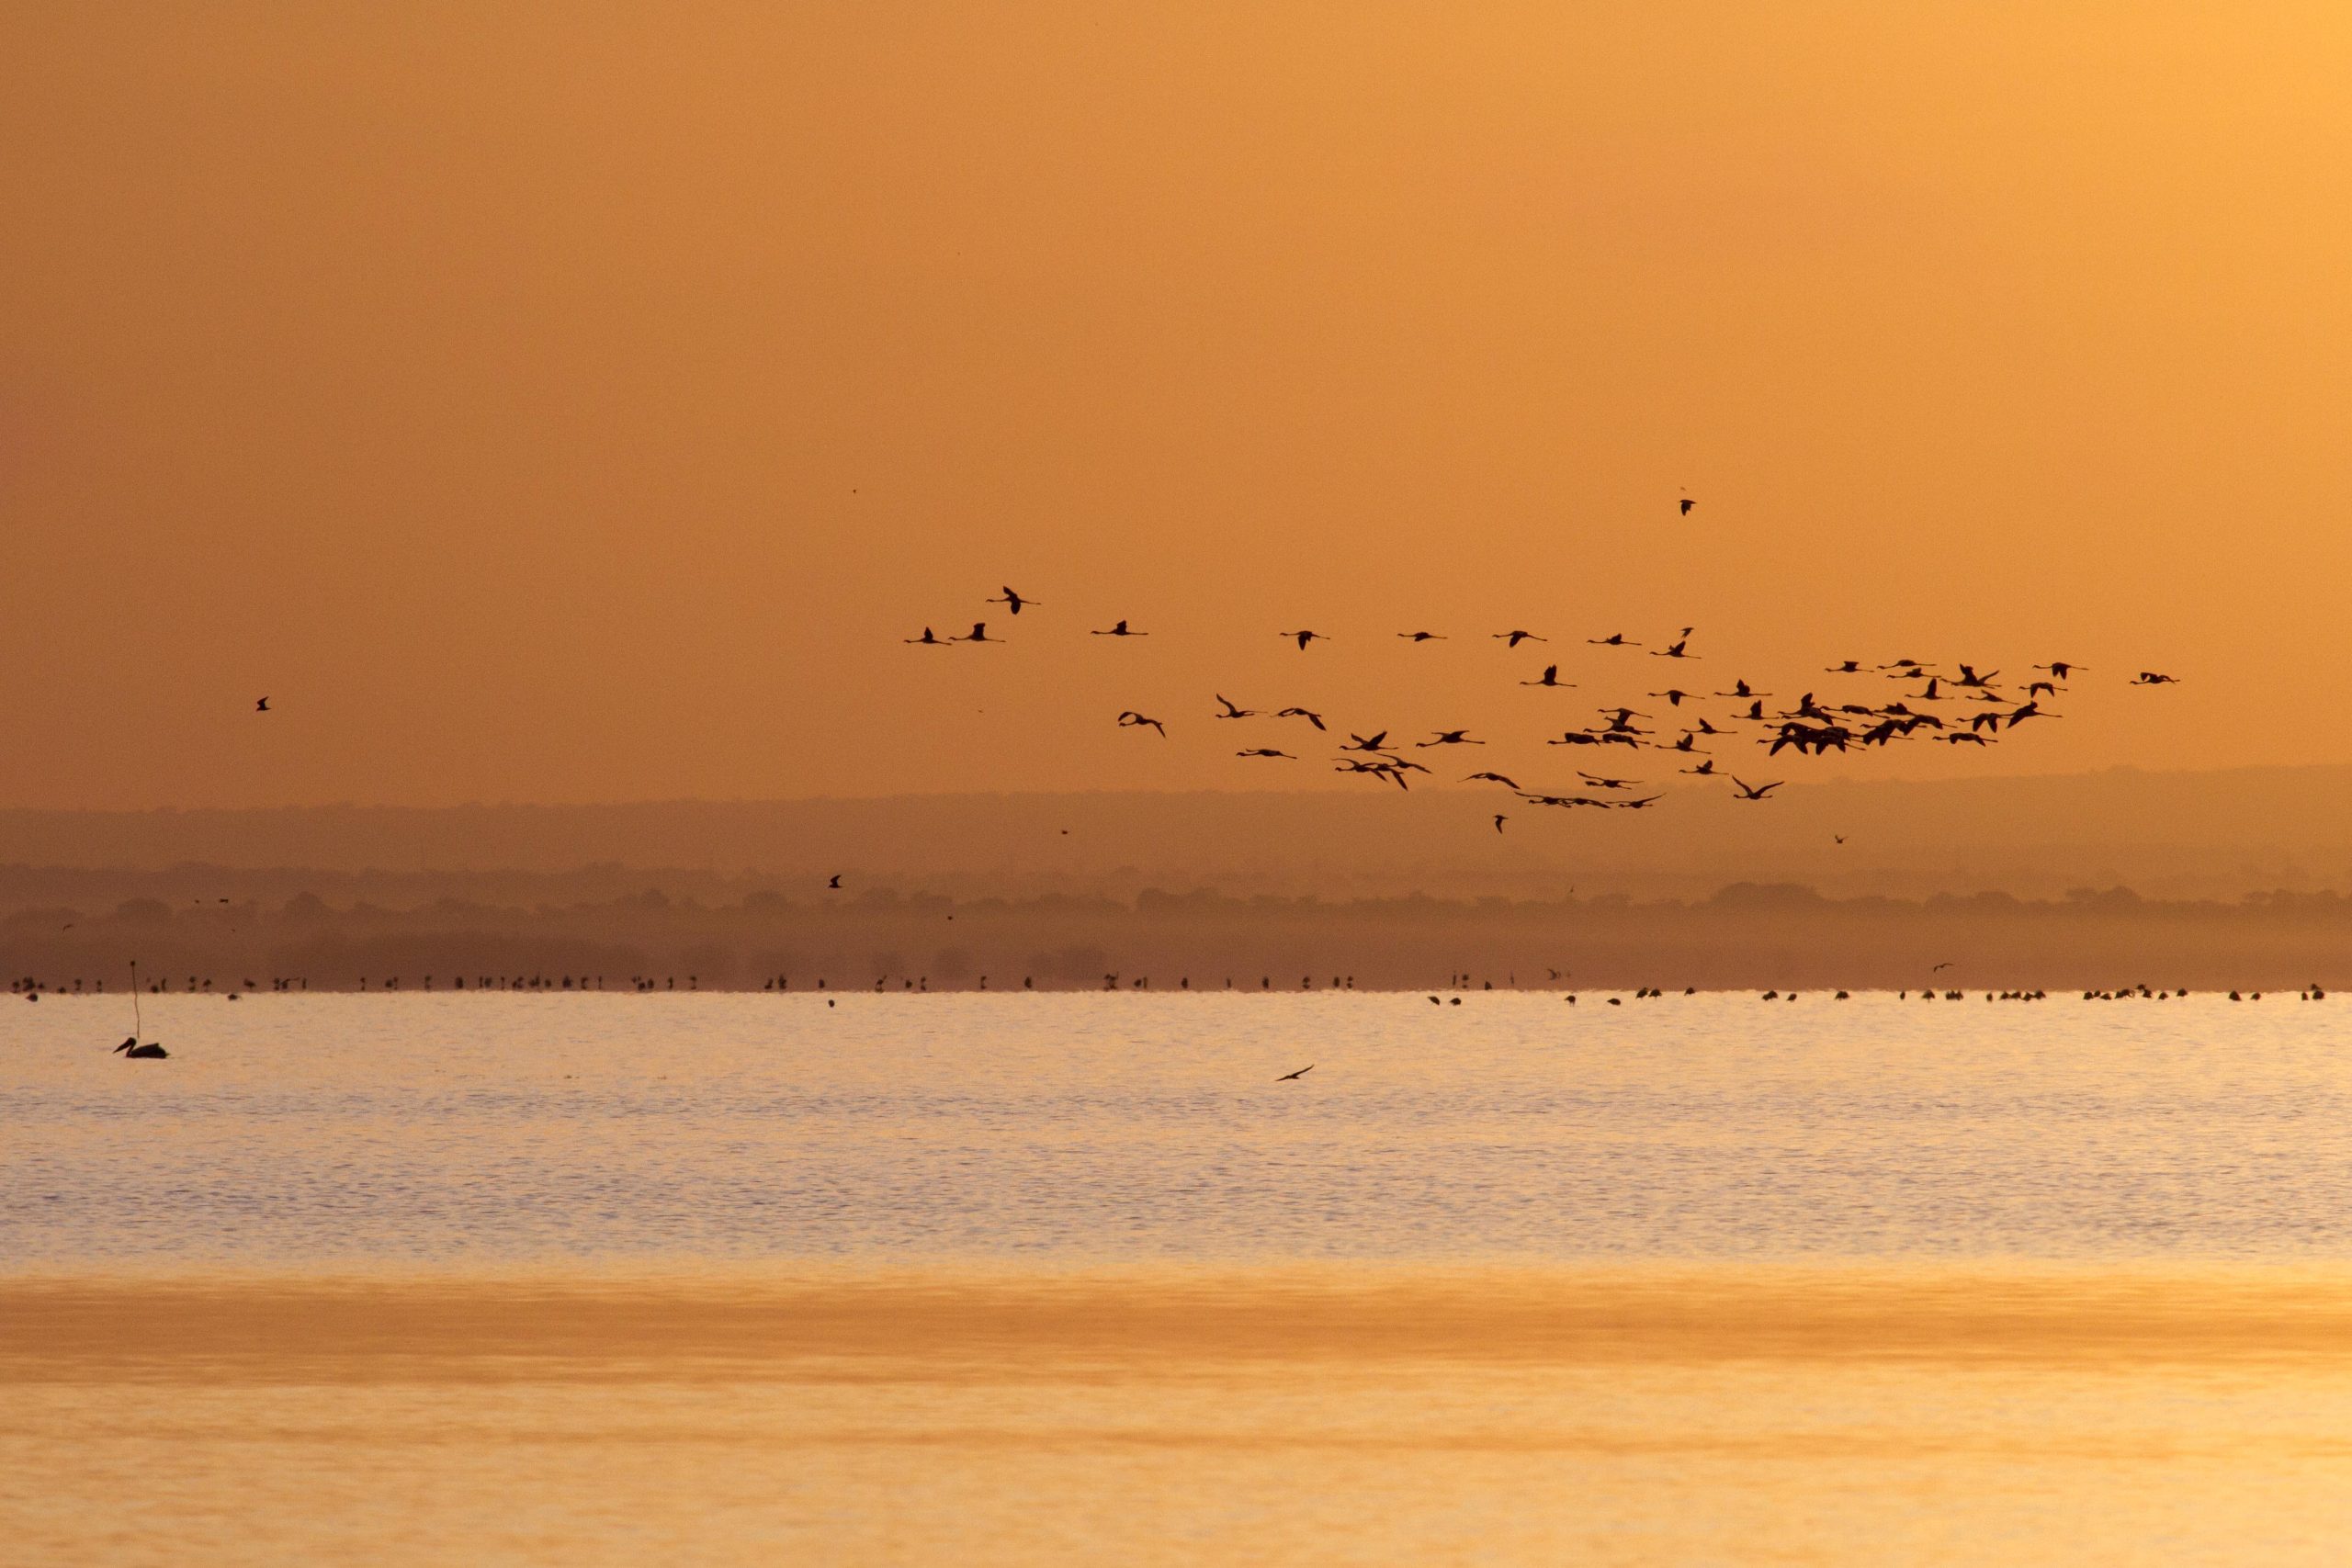 A view of a flock of birds flying over Lake Manyara at sunrise